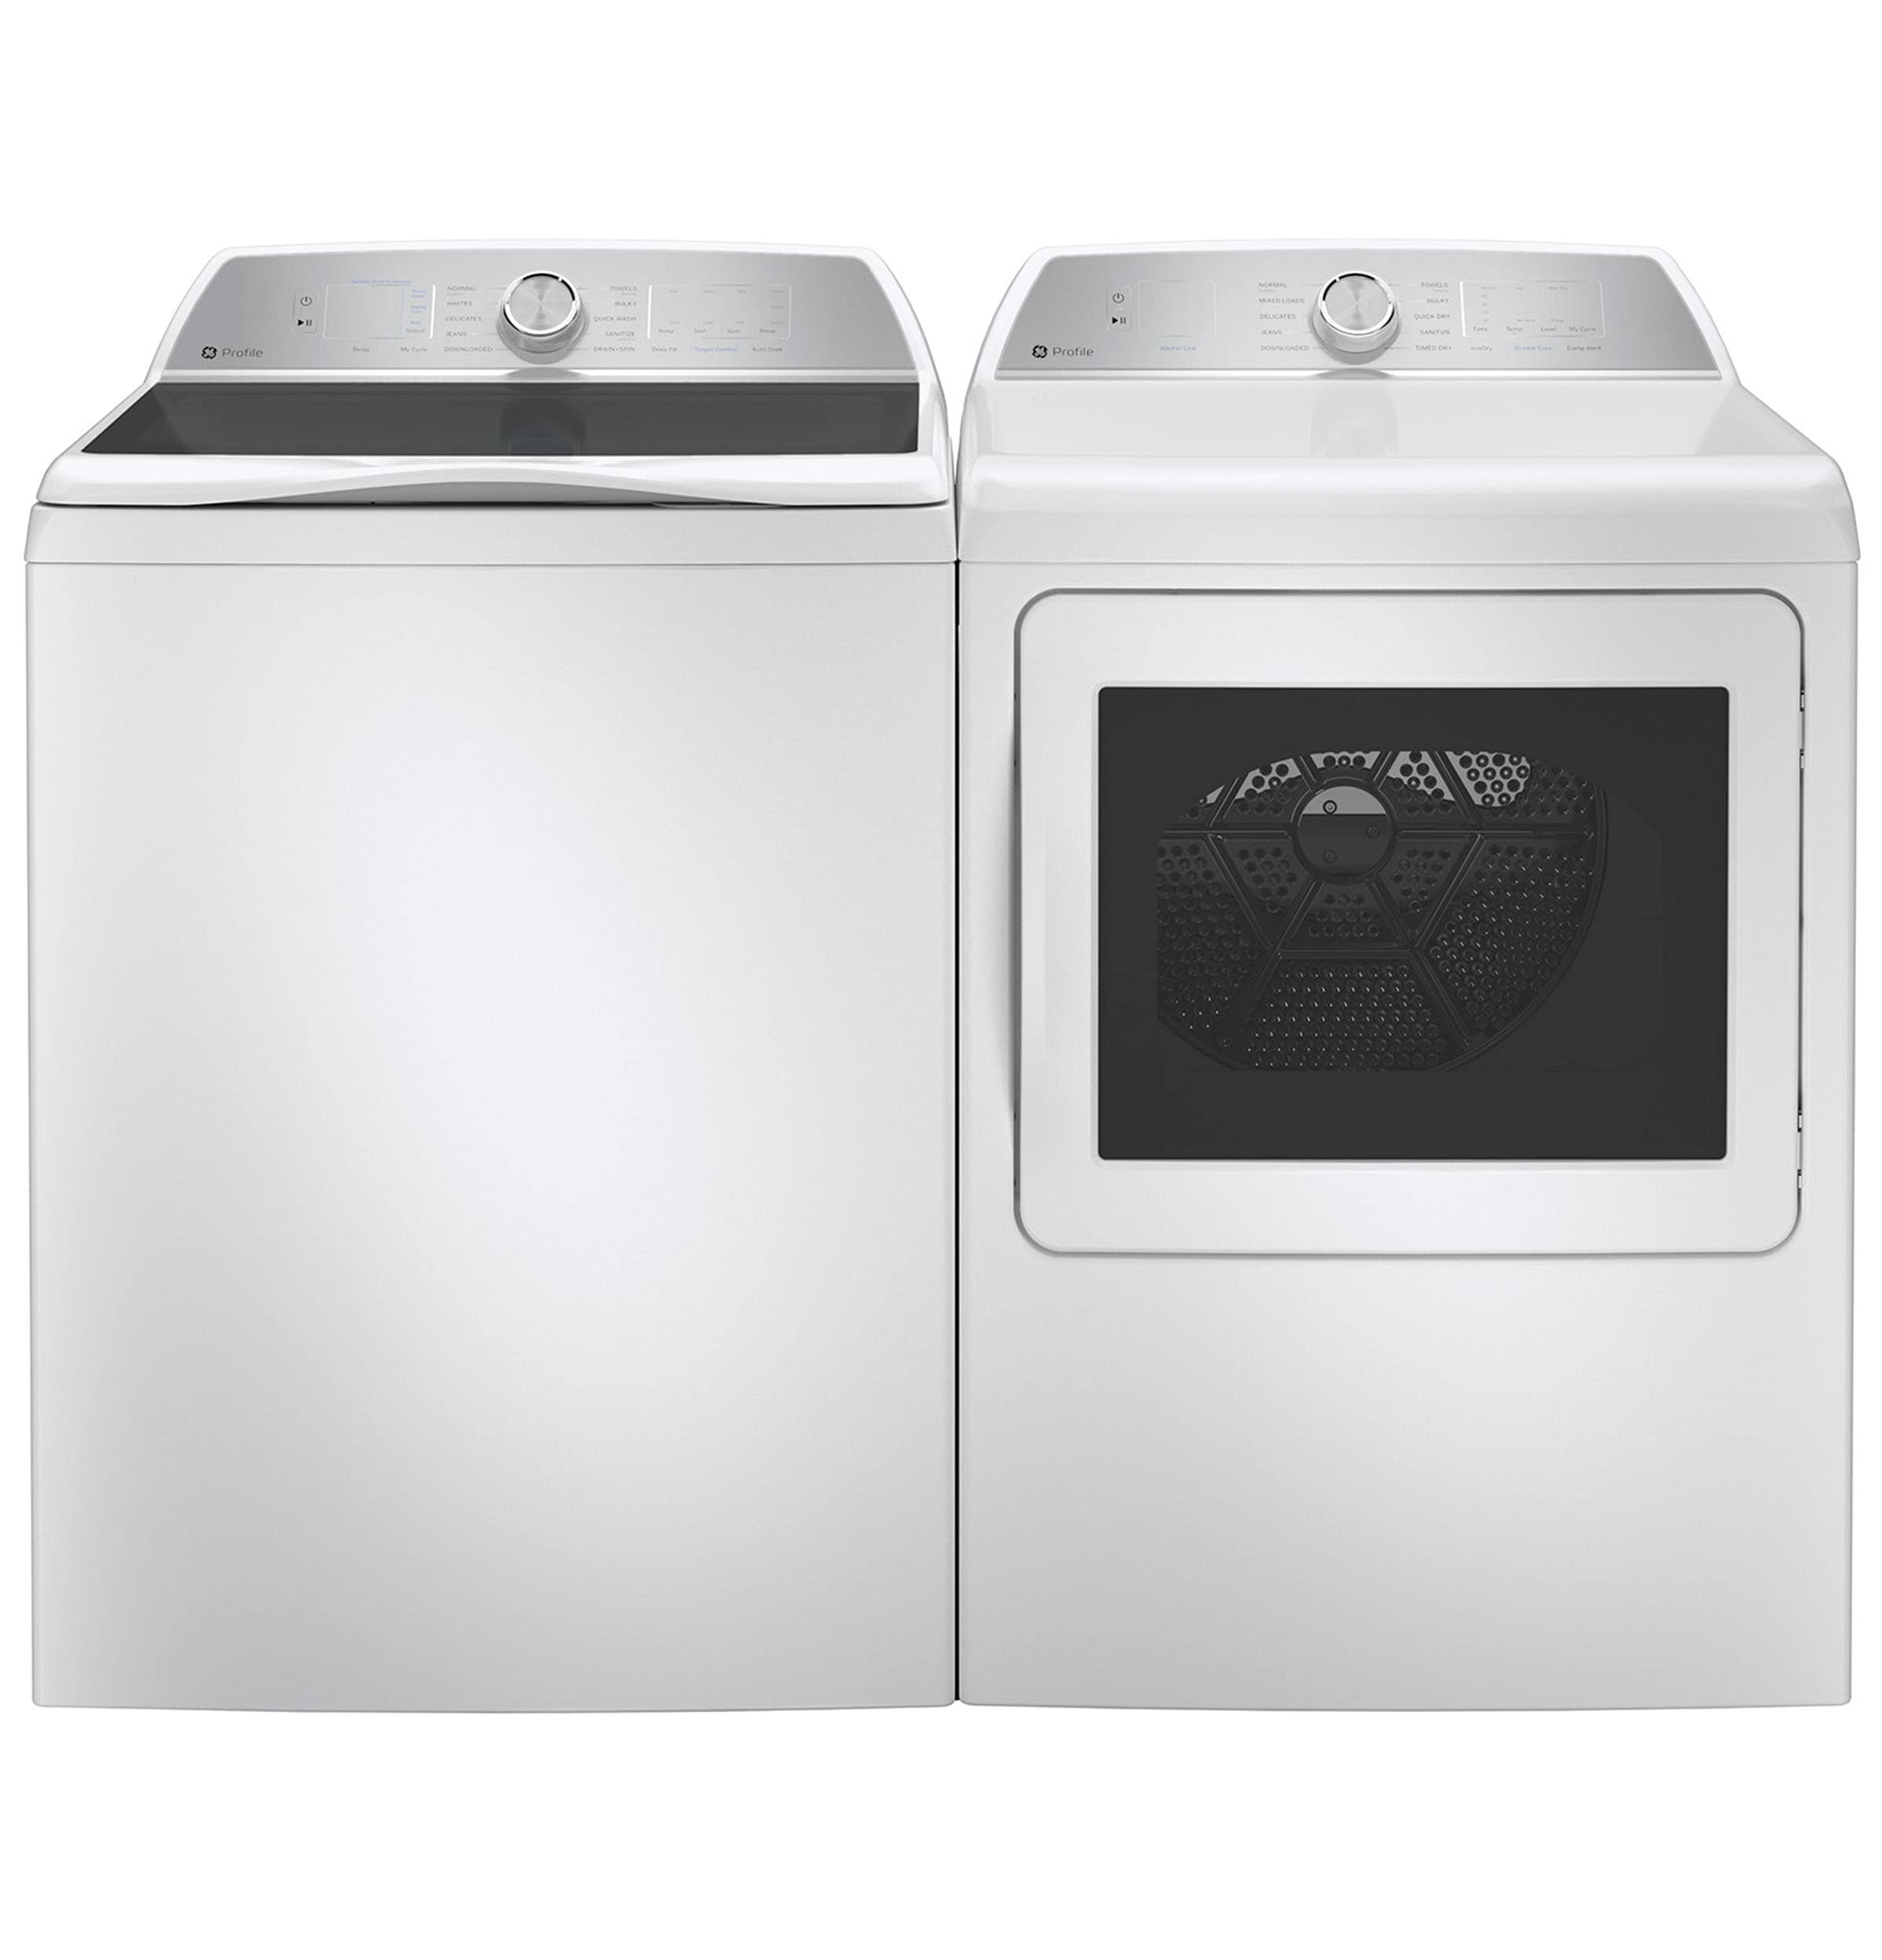 Lowes Washer Dryer Return Policy